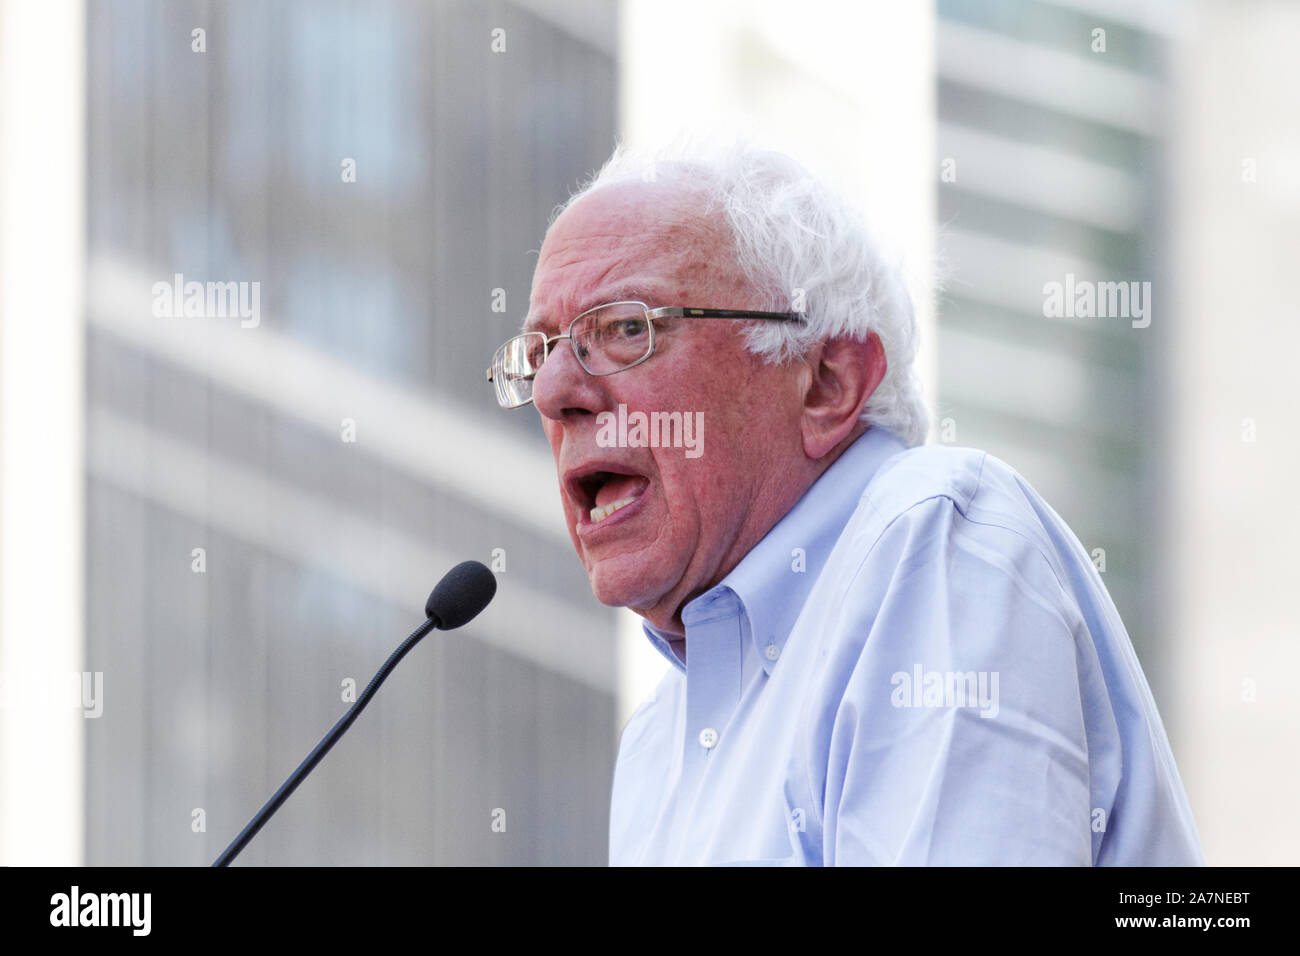 Philadelphia, PA, USA - July 15, 2019: 2020 Presidential candidate Sen. Bernie Sanders joins a rally to stop an impending hospital closure. Stock Photo